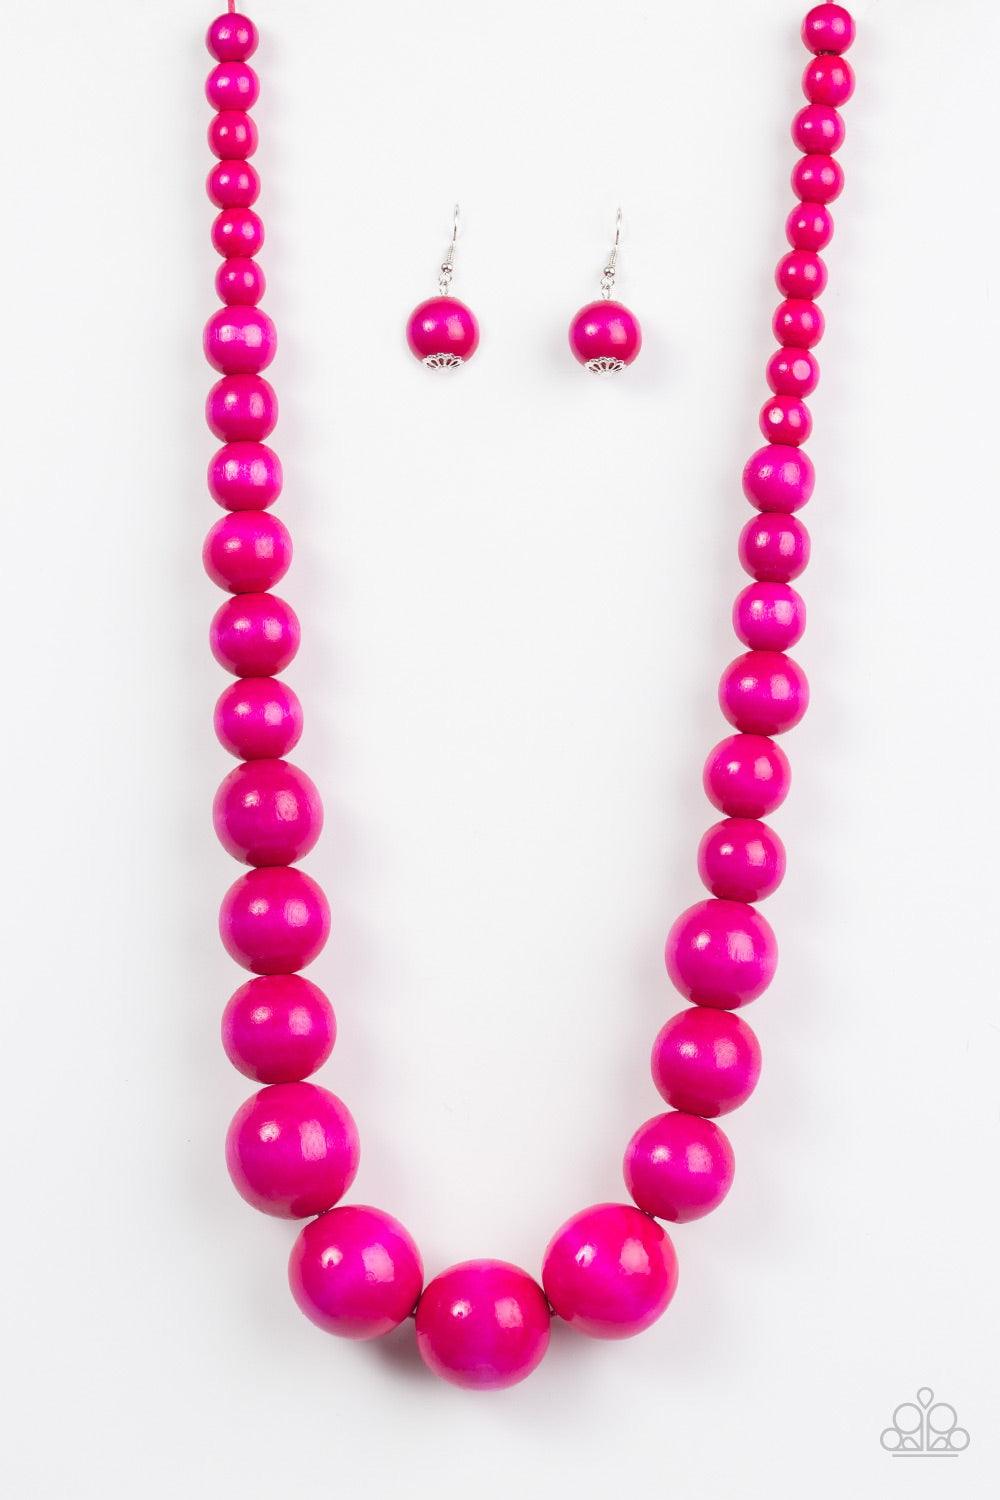 Paparazzi Accessories Effortlessly Everglades - Pink Gradually increasing in size near the center, vivacious pink wooden beads are threaded along a pink string for a summery look. Features an adjustable sliding knot closure. Jewelry